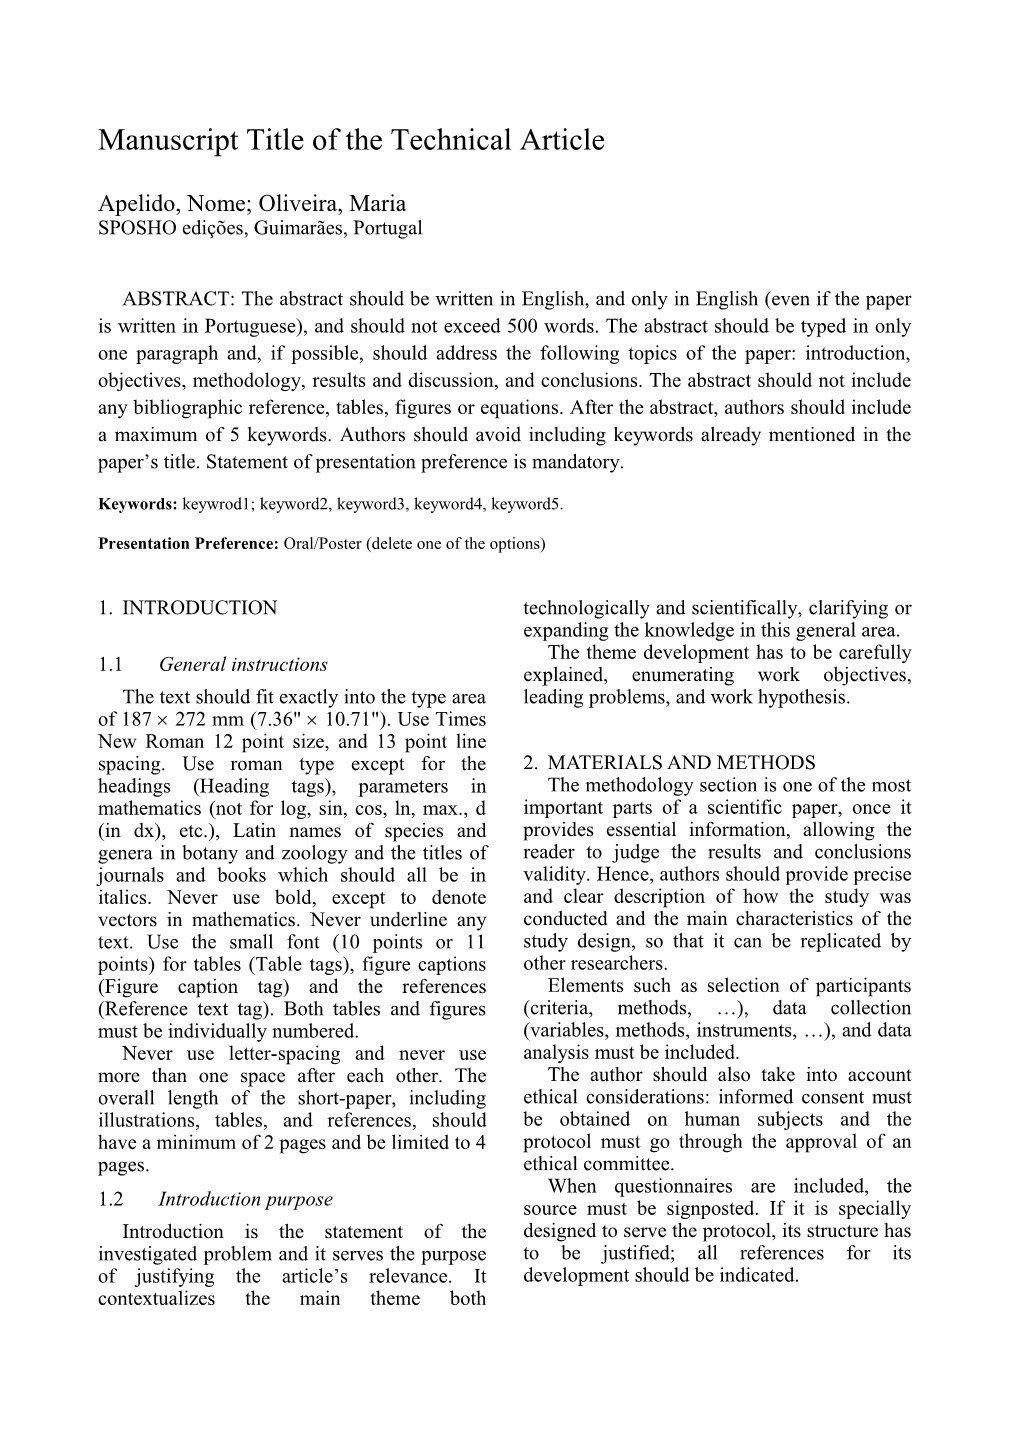 Manuscript Title of the Technical Article